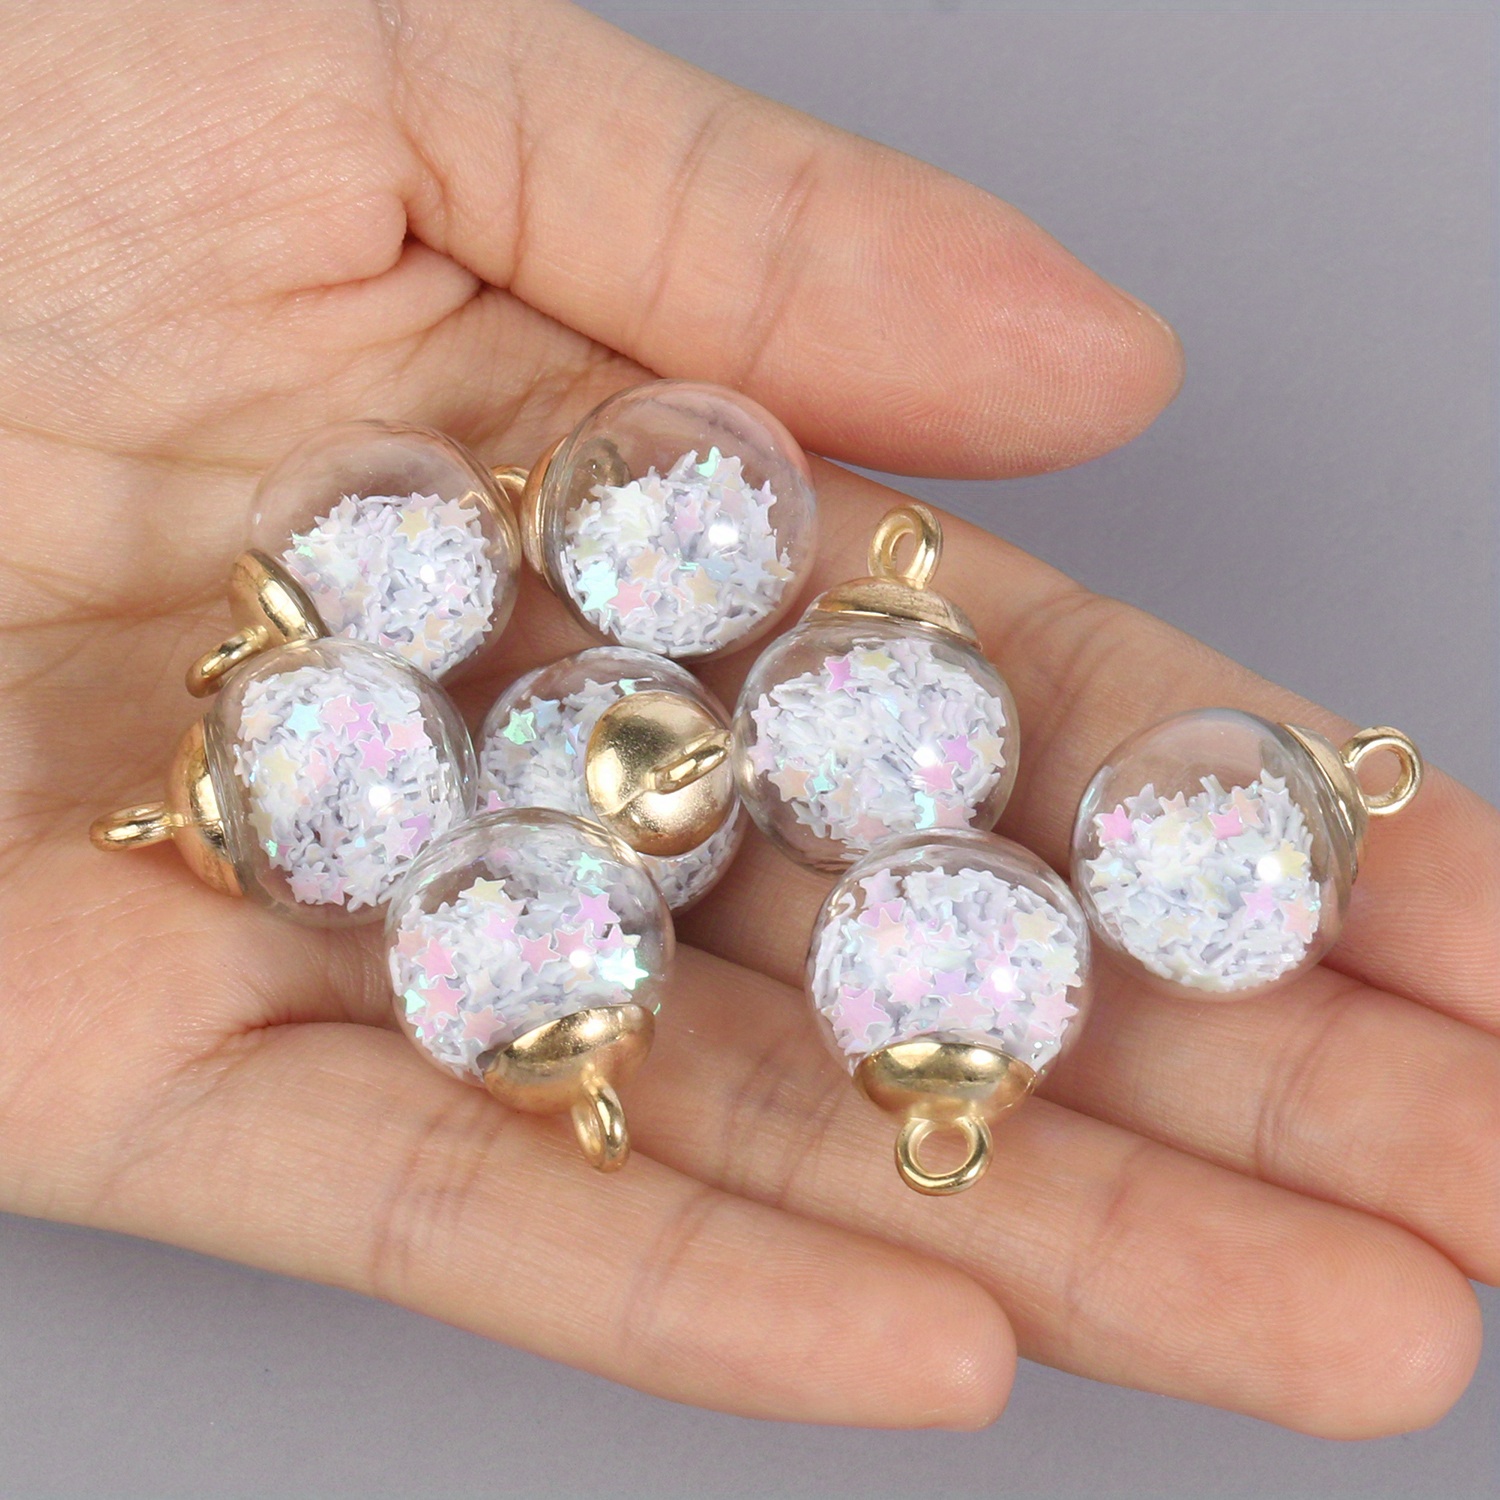 10/20pcs Transparent Ball Fruit Star Colorful Resin Charms For